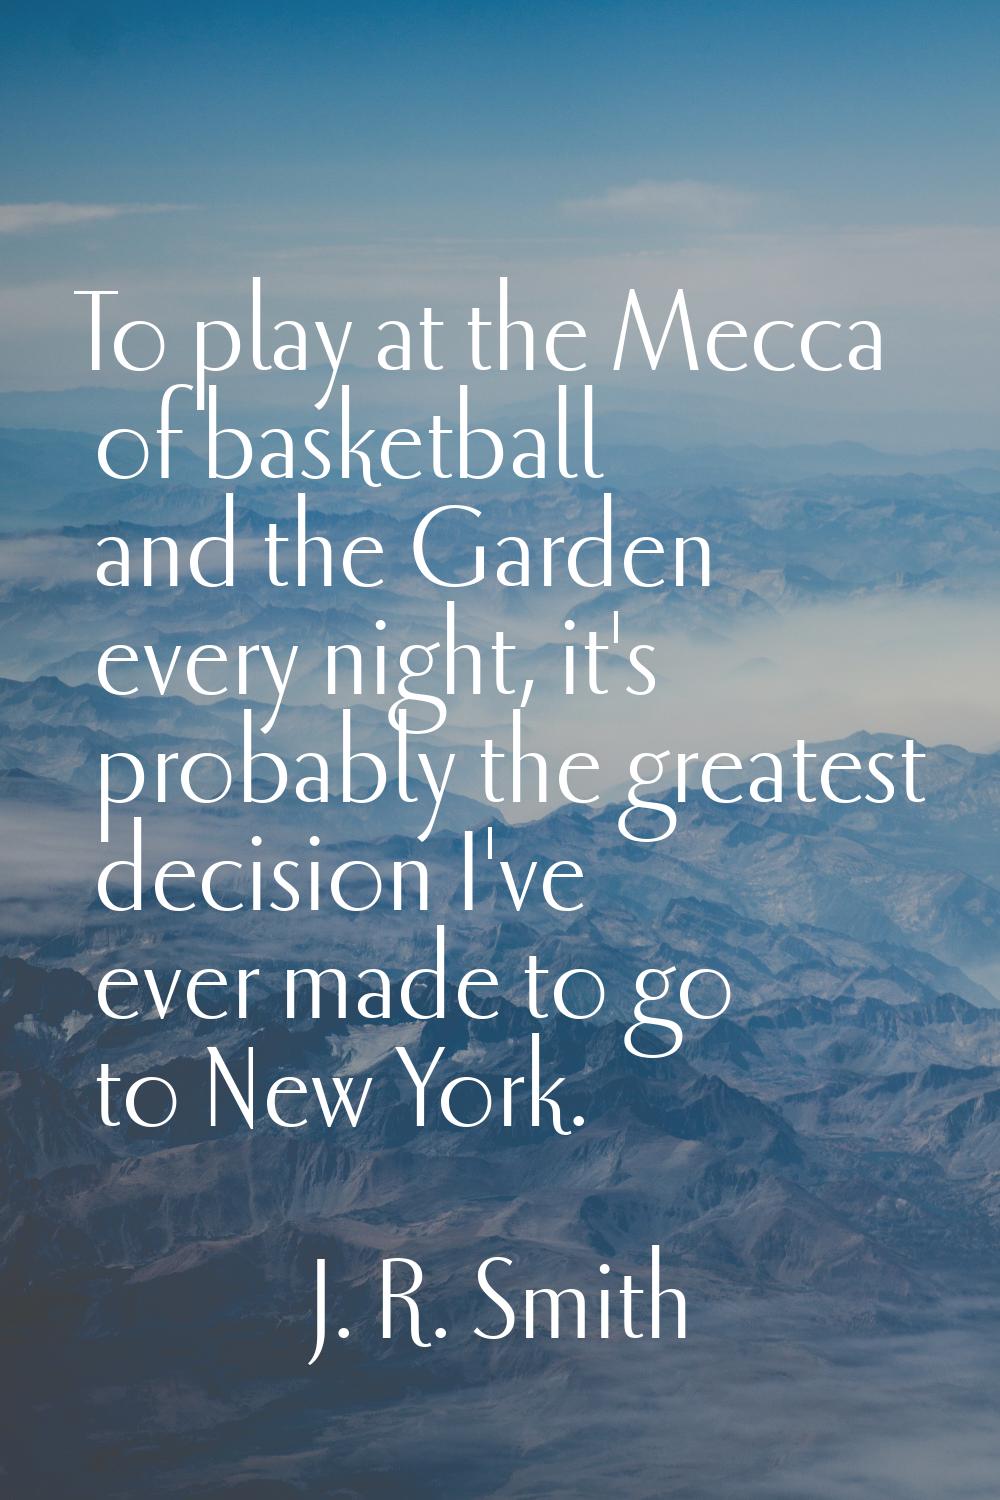 To play at the Mecca of basketball and the Garden every night, it's probably the greatest decision 